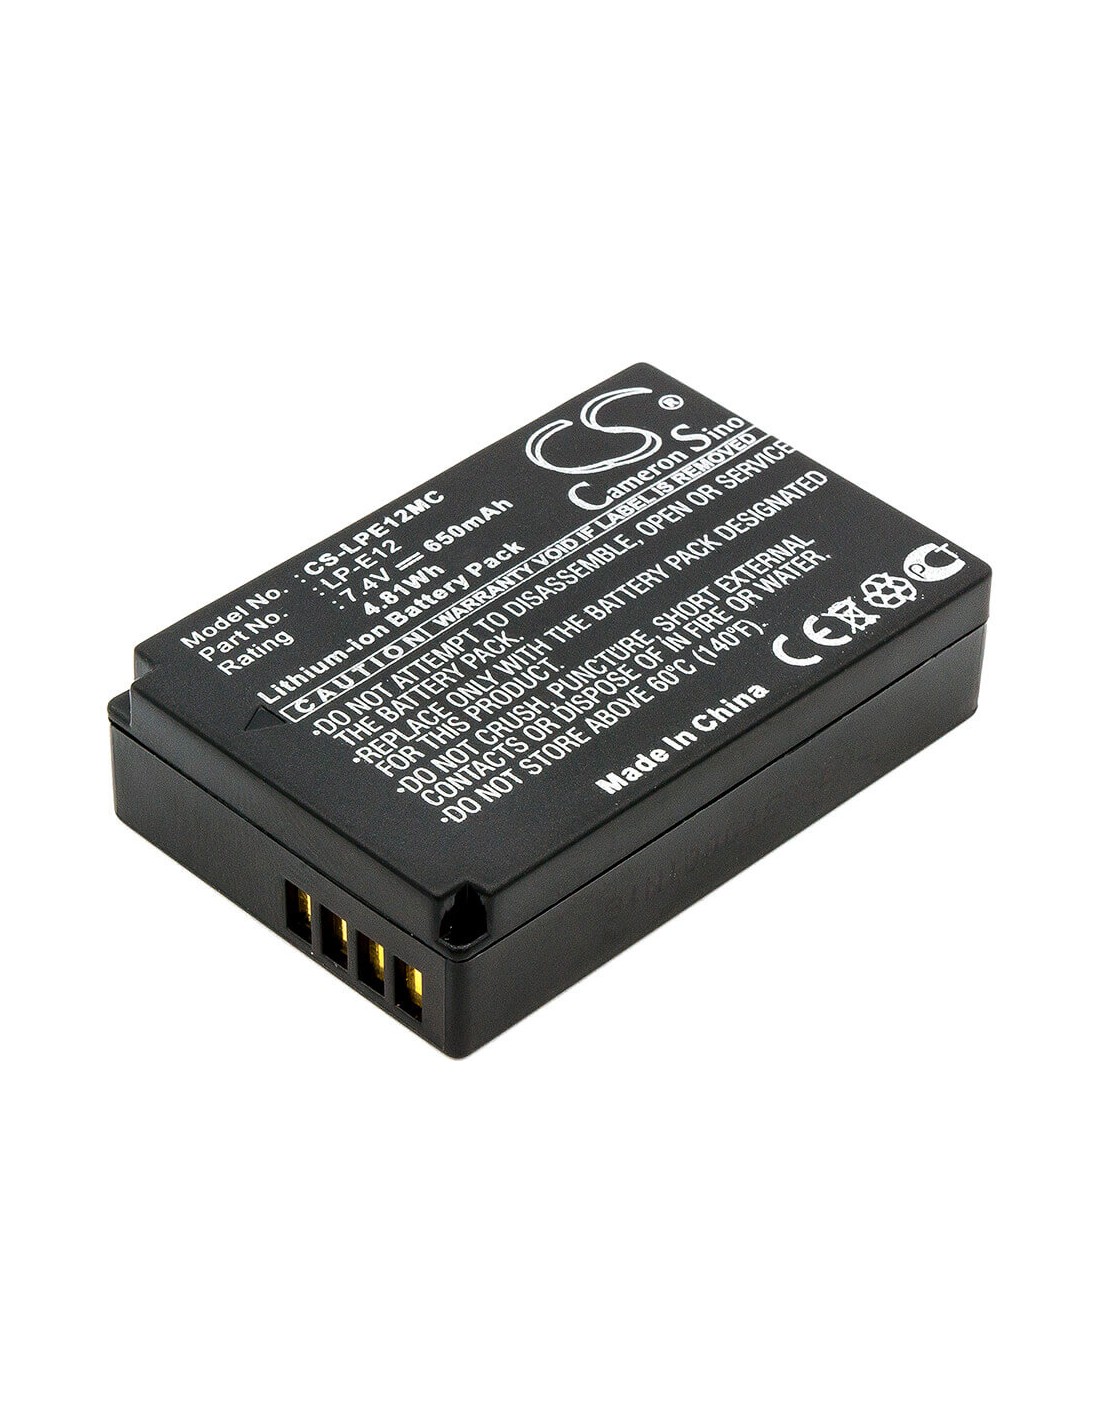 Battery for Canon Eos 100d, Eos M, 7.4V, 650mAh - 4.81Wh